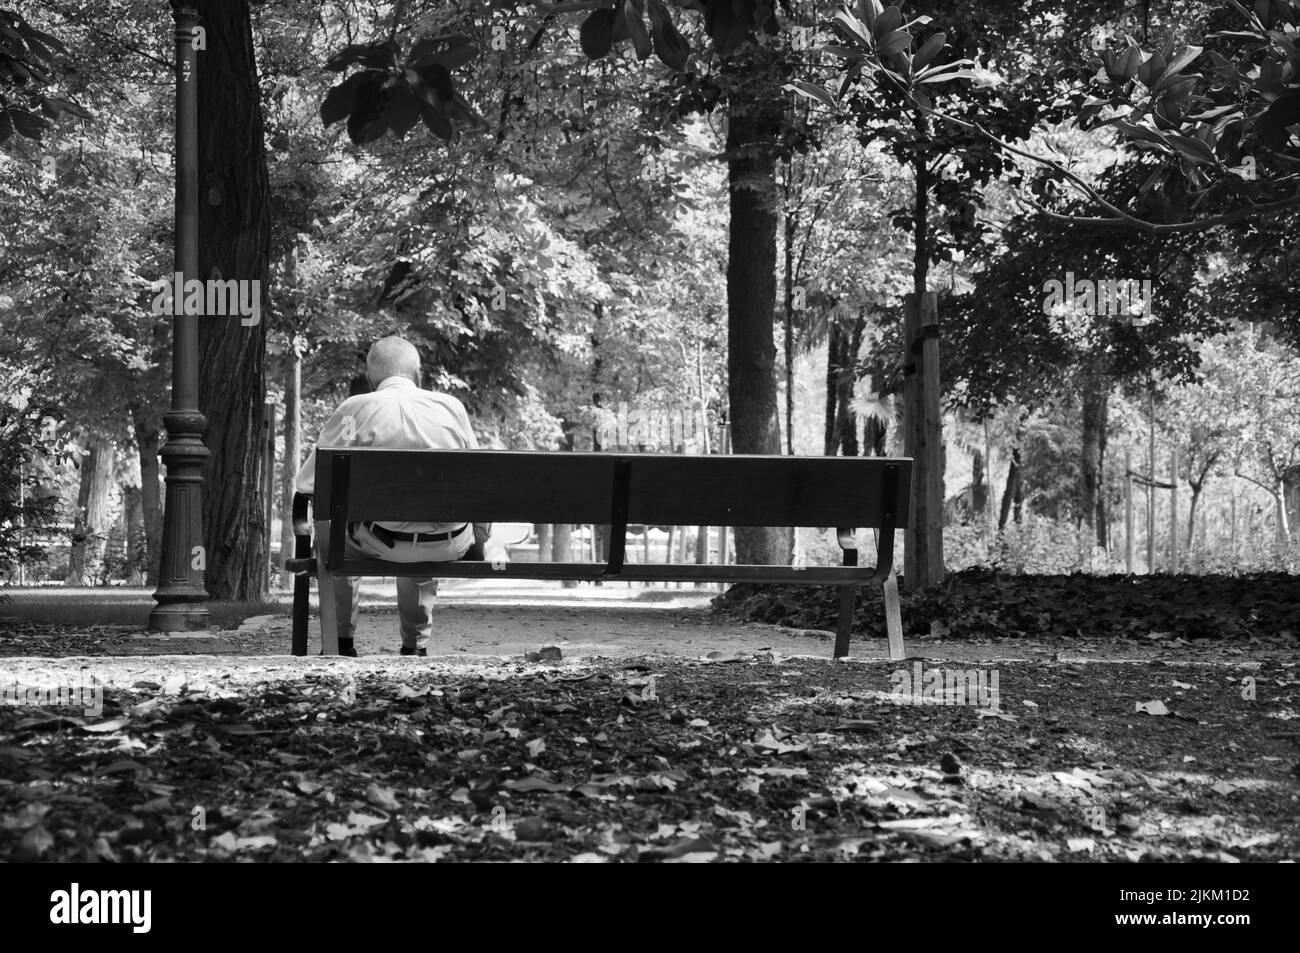 An old man with white hair sitting on a bench in Retiro Park in Madrid, Spain Stock Photo